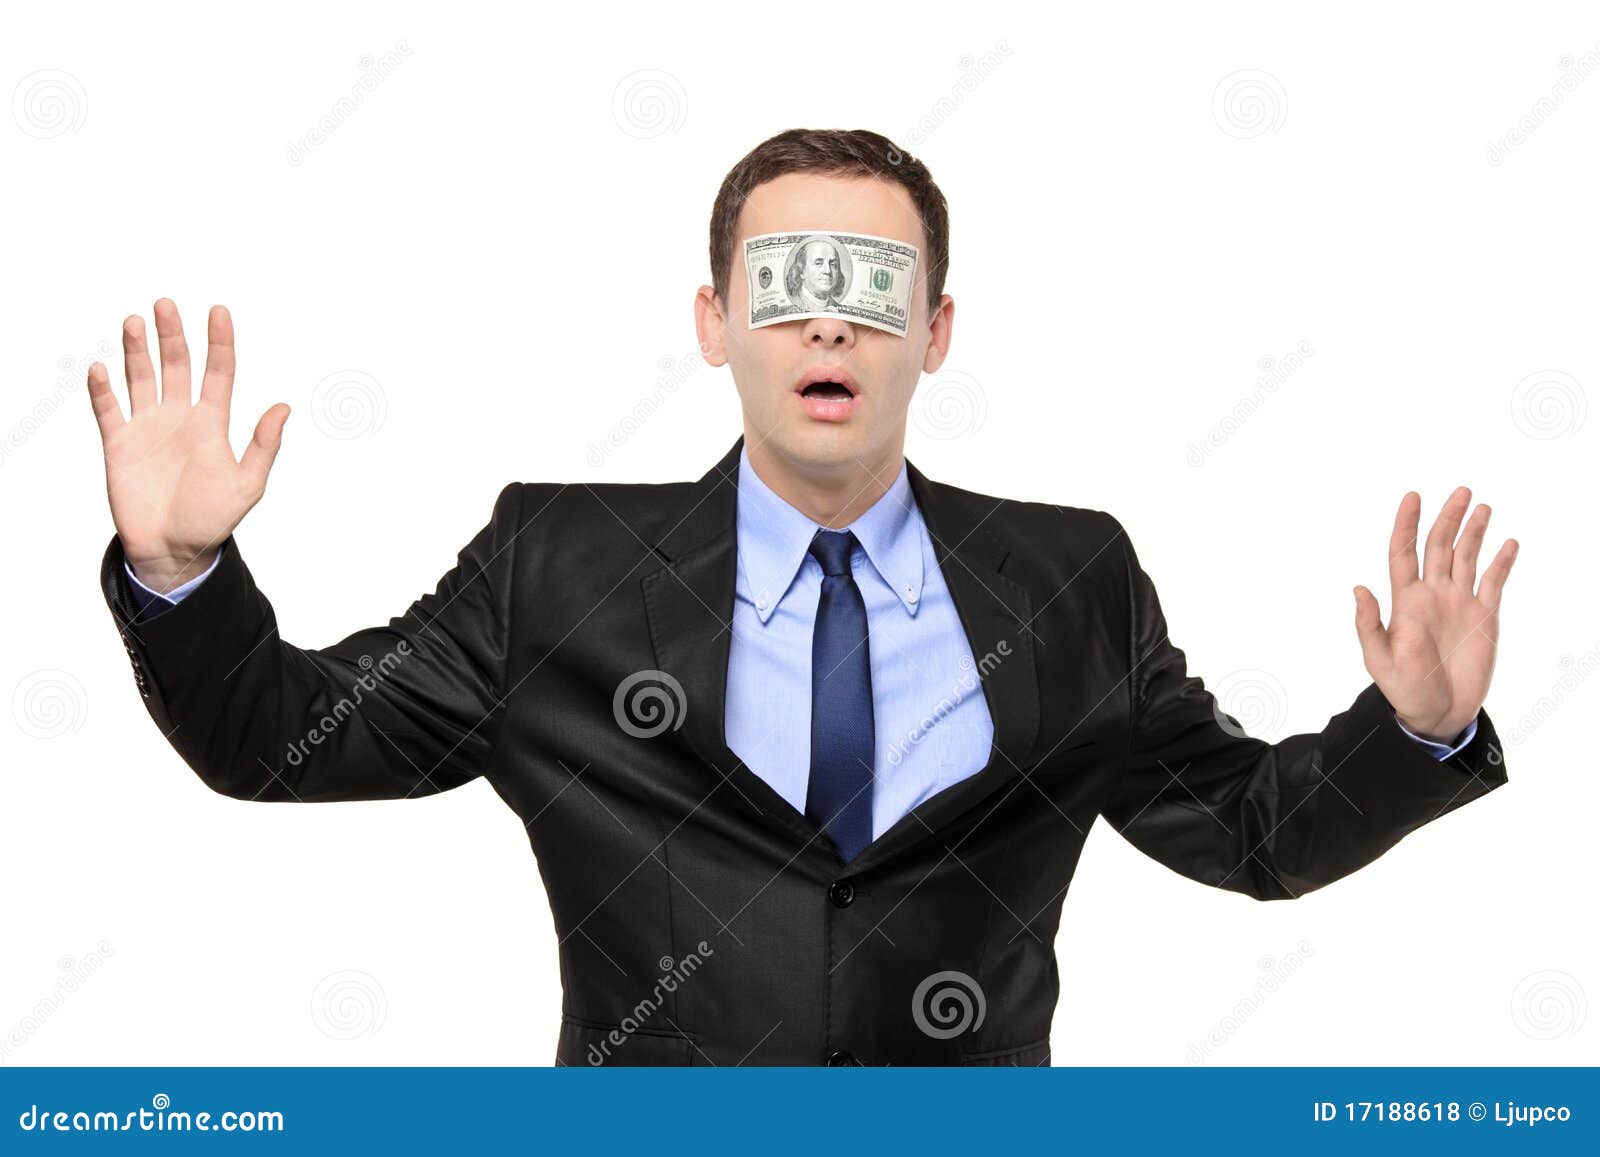 2+ Thousand Confused Man Blindfold Royalty-Free Images, Stock